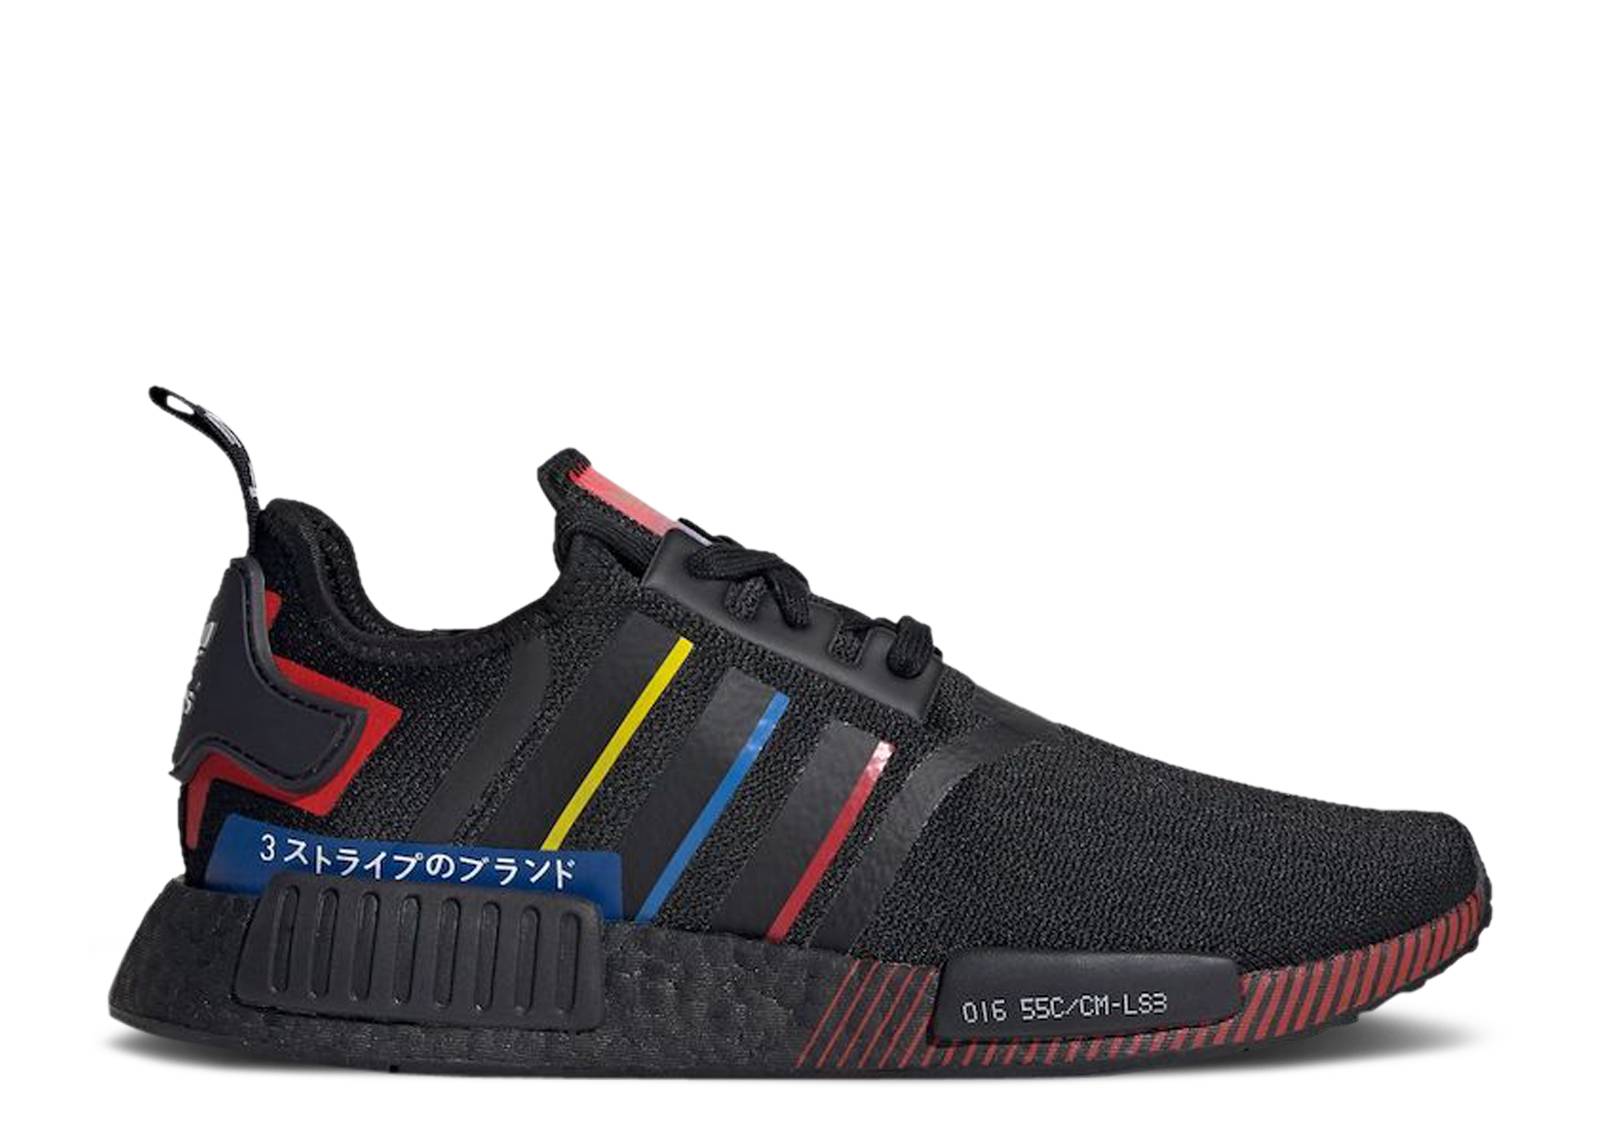 NMD_R1 'Olympic Pack - Black'